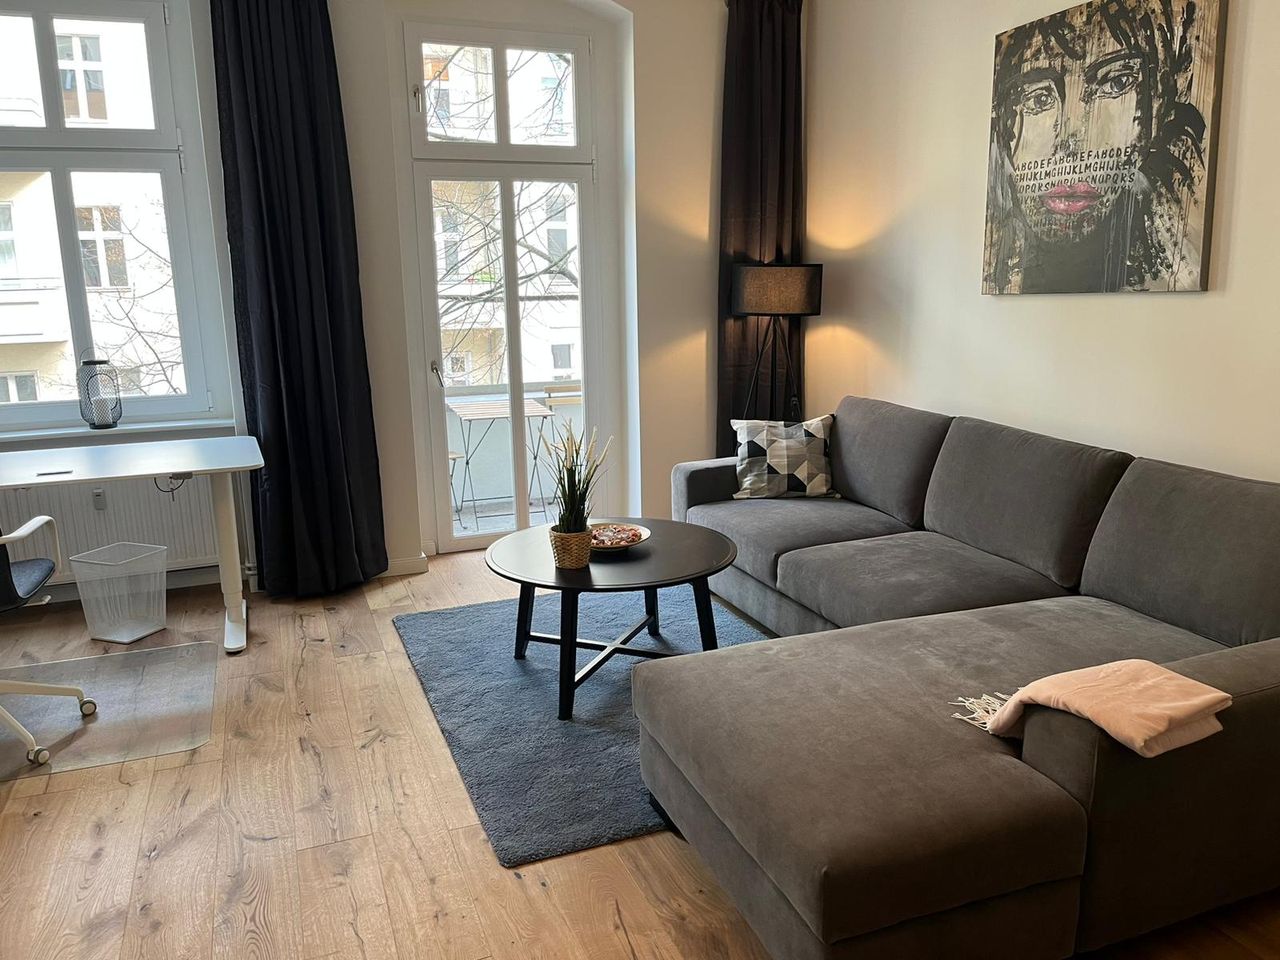 Newly renovated, fully furnished apartment in Friedrichshain - perfect for Homeoffice